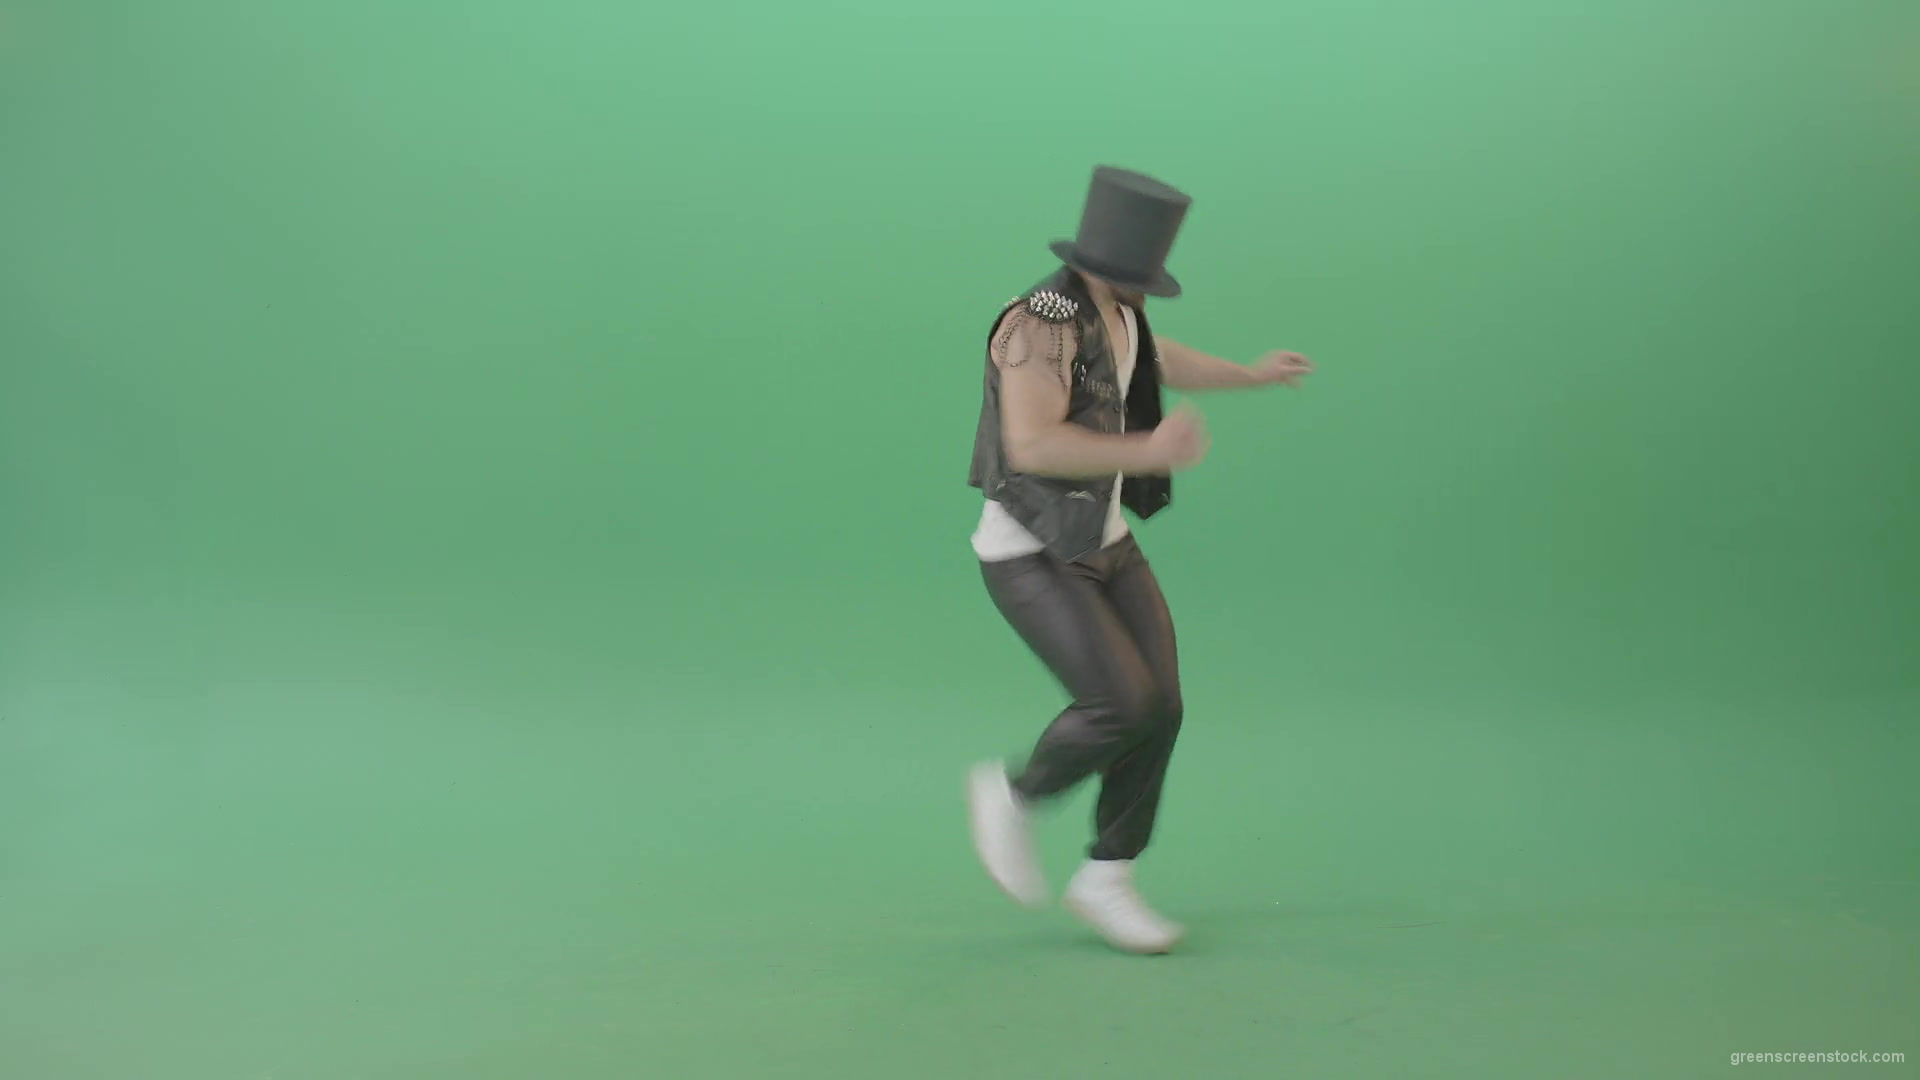 Man-in-black-Busines-Cylinder-Hat-dancing-and-jumping-in-Shuffle-dance-isolated-on-Green-Screen-4K-Video-Footage-1920_009 Green Screen Stock